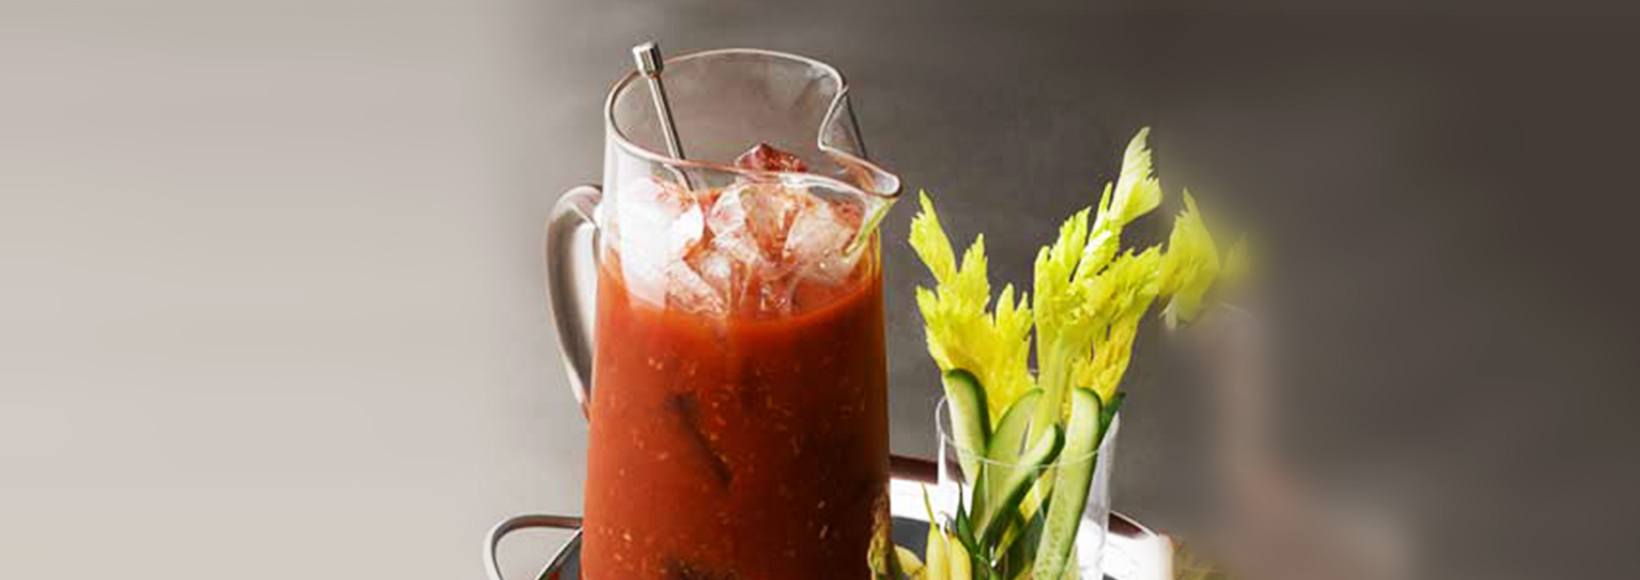 https://www.greygoose.com/binaries/content/gallery/greygoose/cocktails/grey-goose-vodka/bloody-mary-pitcher/landscape.jpg